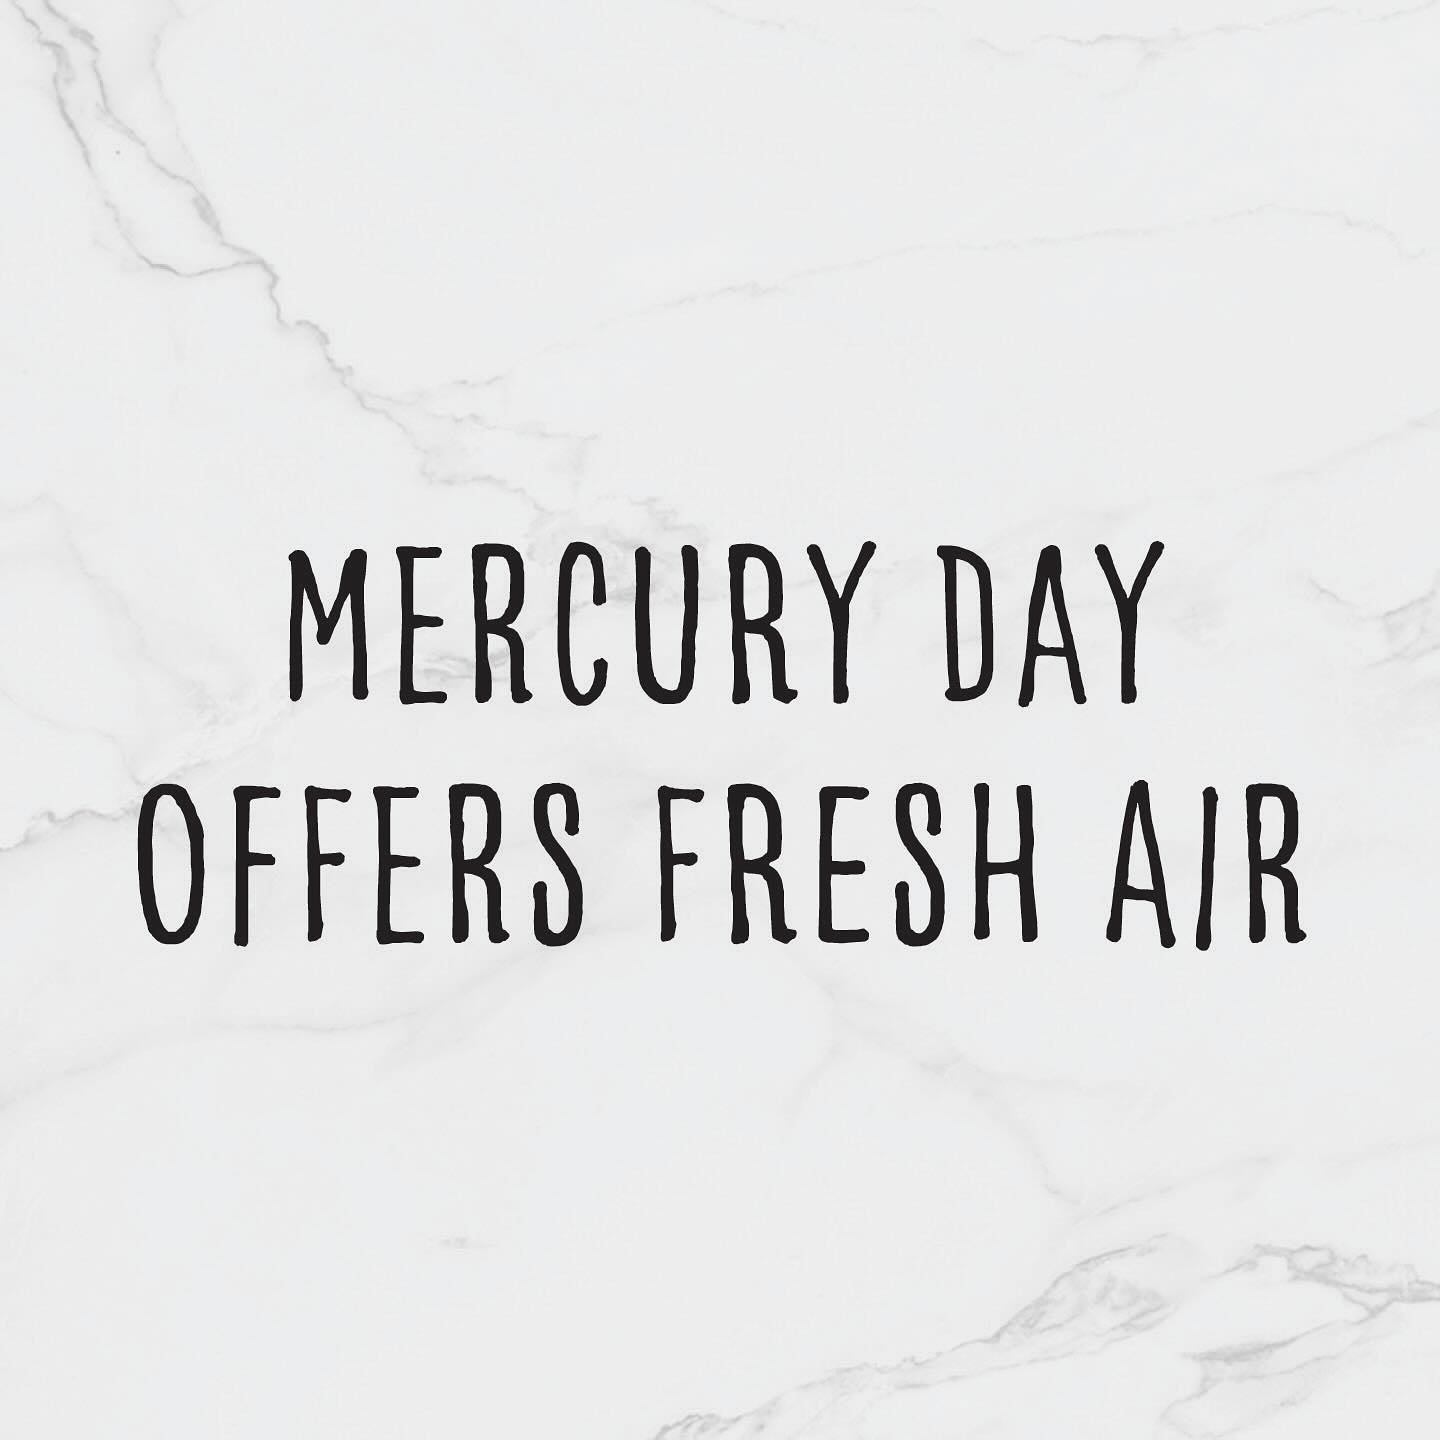 How do you like to spend your Mercury Day (Wednesday)?

Whether you&rsquo;re speaking your truth, hosting a hilarious podcast, working on new business ideas, reading a new book, or proving you&rsquo;re the throat goat, it&rsquo;s all good for Mercury